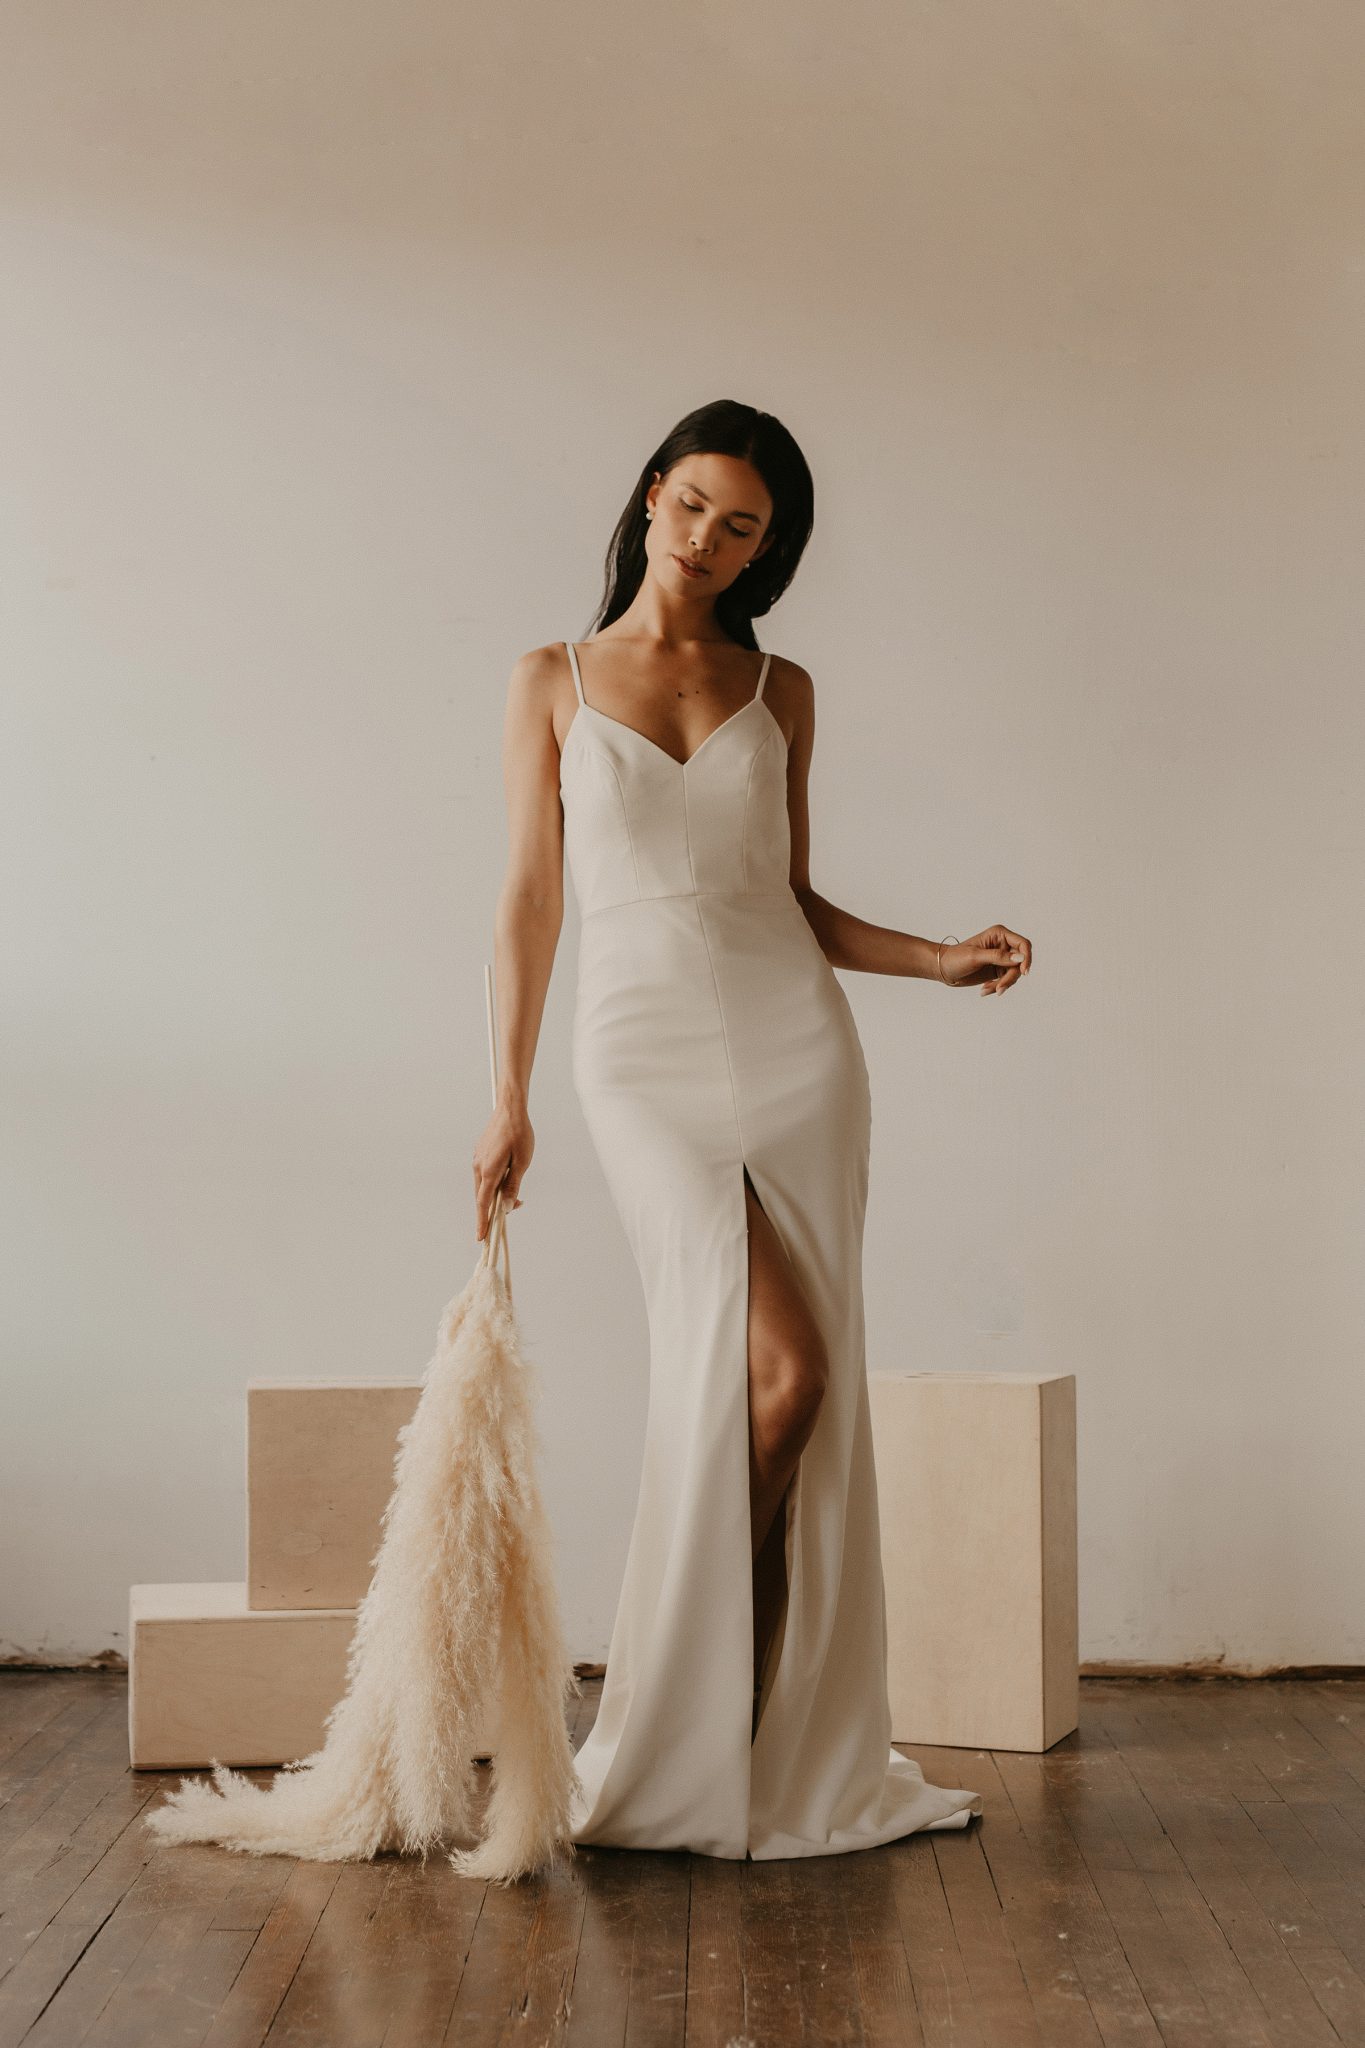 Bridal Minimalism Feature on Bronte Bride: Delica Bridal Shares All About New Bridal Trends & Dress Shopping During Covid, wedding dress shopping, boho bridal portraits